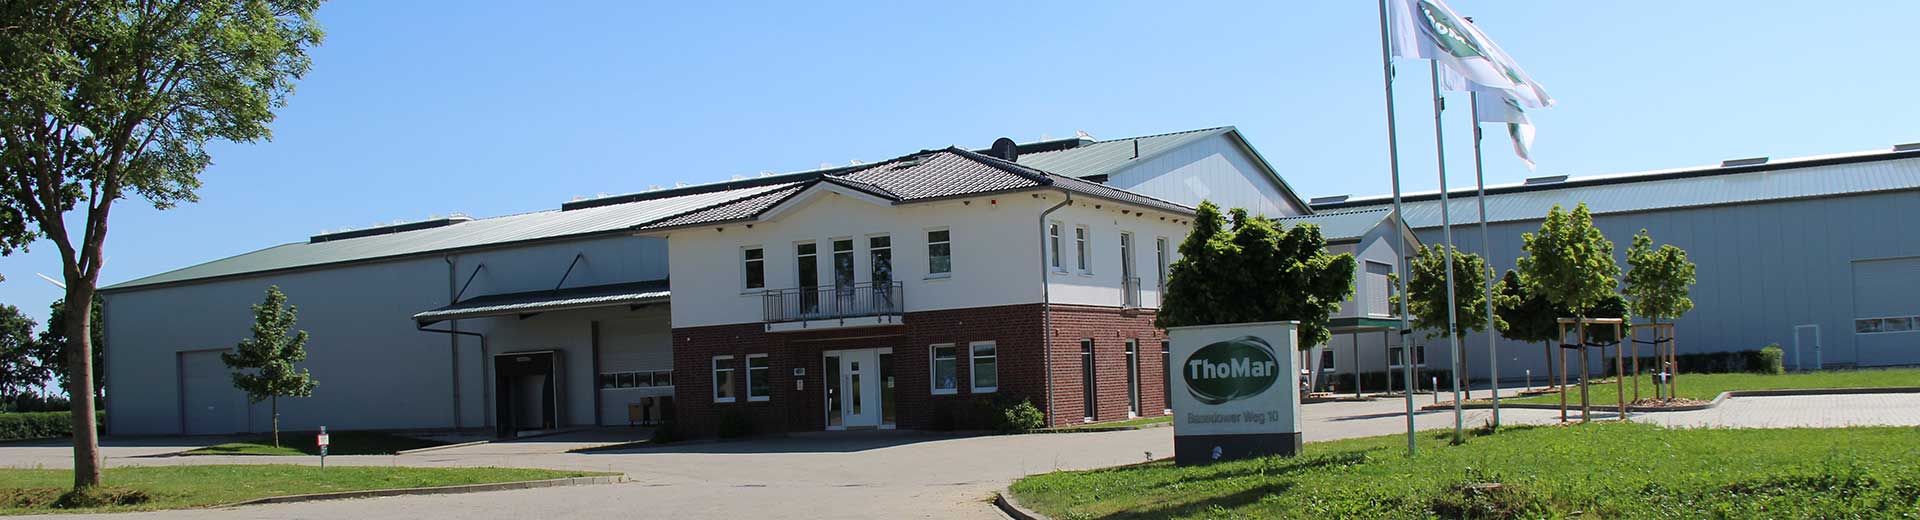 Front view of the company building